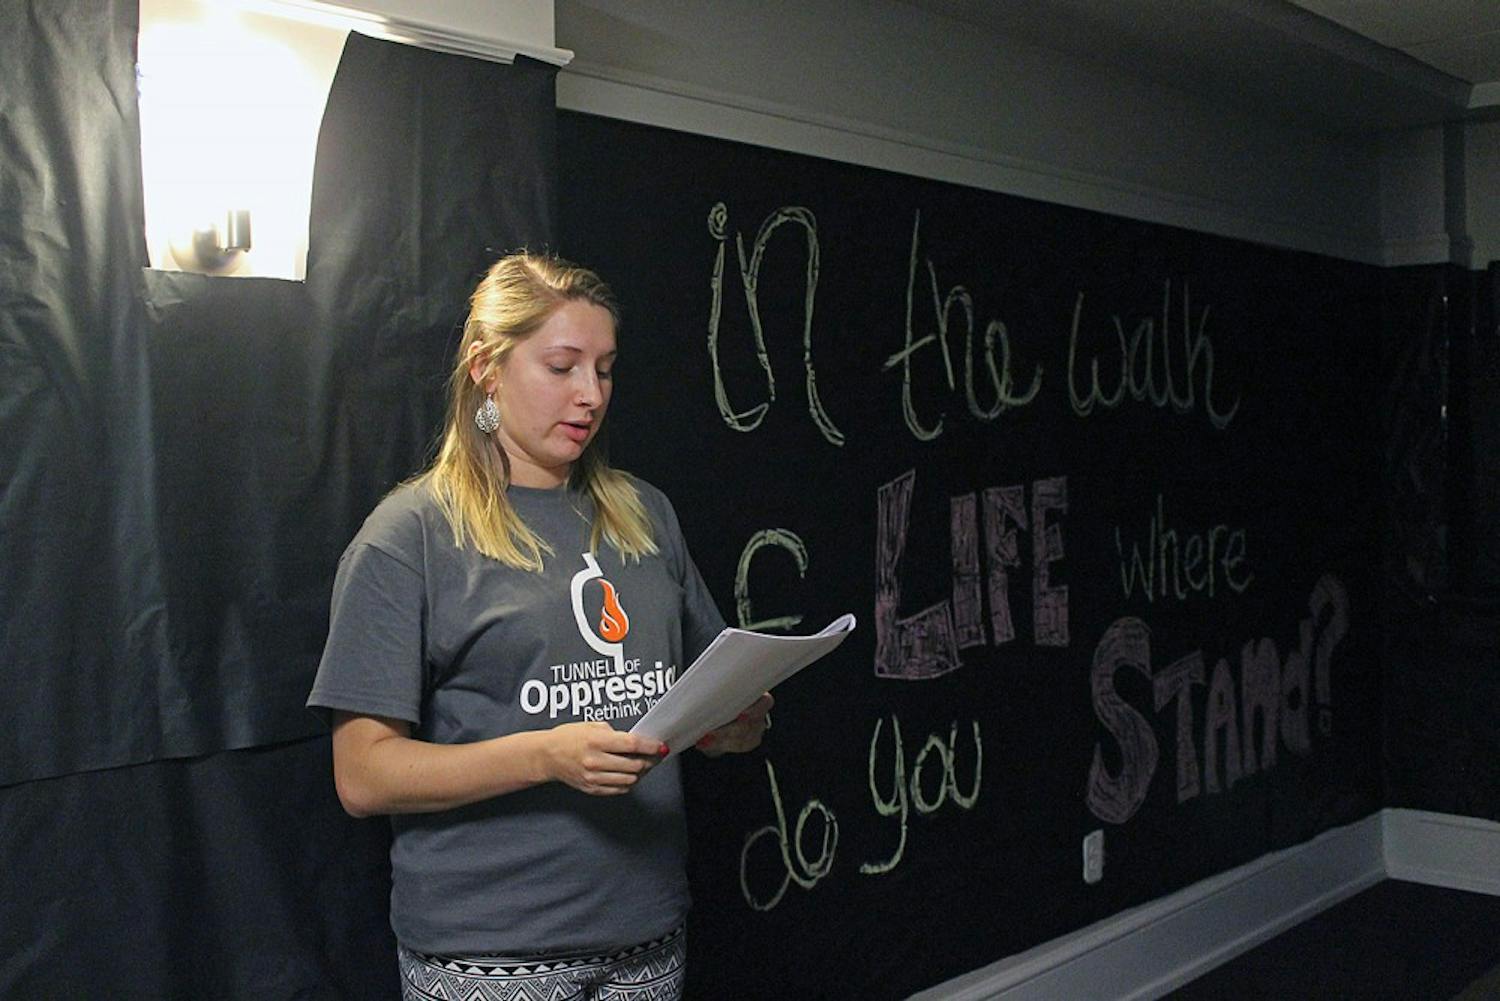 Alix Desch is the Operations Manager of the 2014 Tunnel of Oppression. The Tunnel of Oppression is a tour that engages participants in a number of first hand forms of oppression through interactive acting, viewing monologues and forms of multimedia. The tours began on Monday, March 31 and will continue until Wednesday, April 2 in Cobb Residence Hall. 